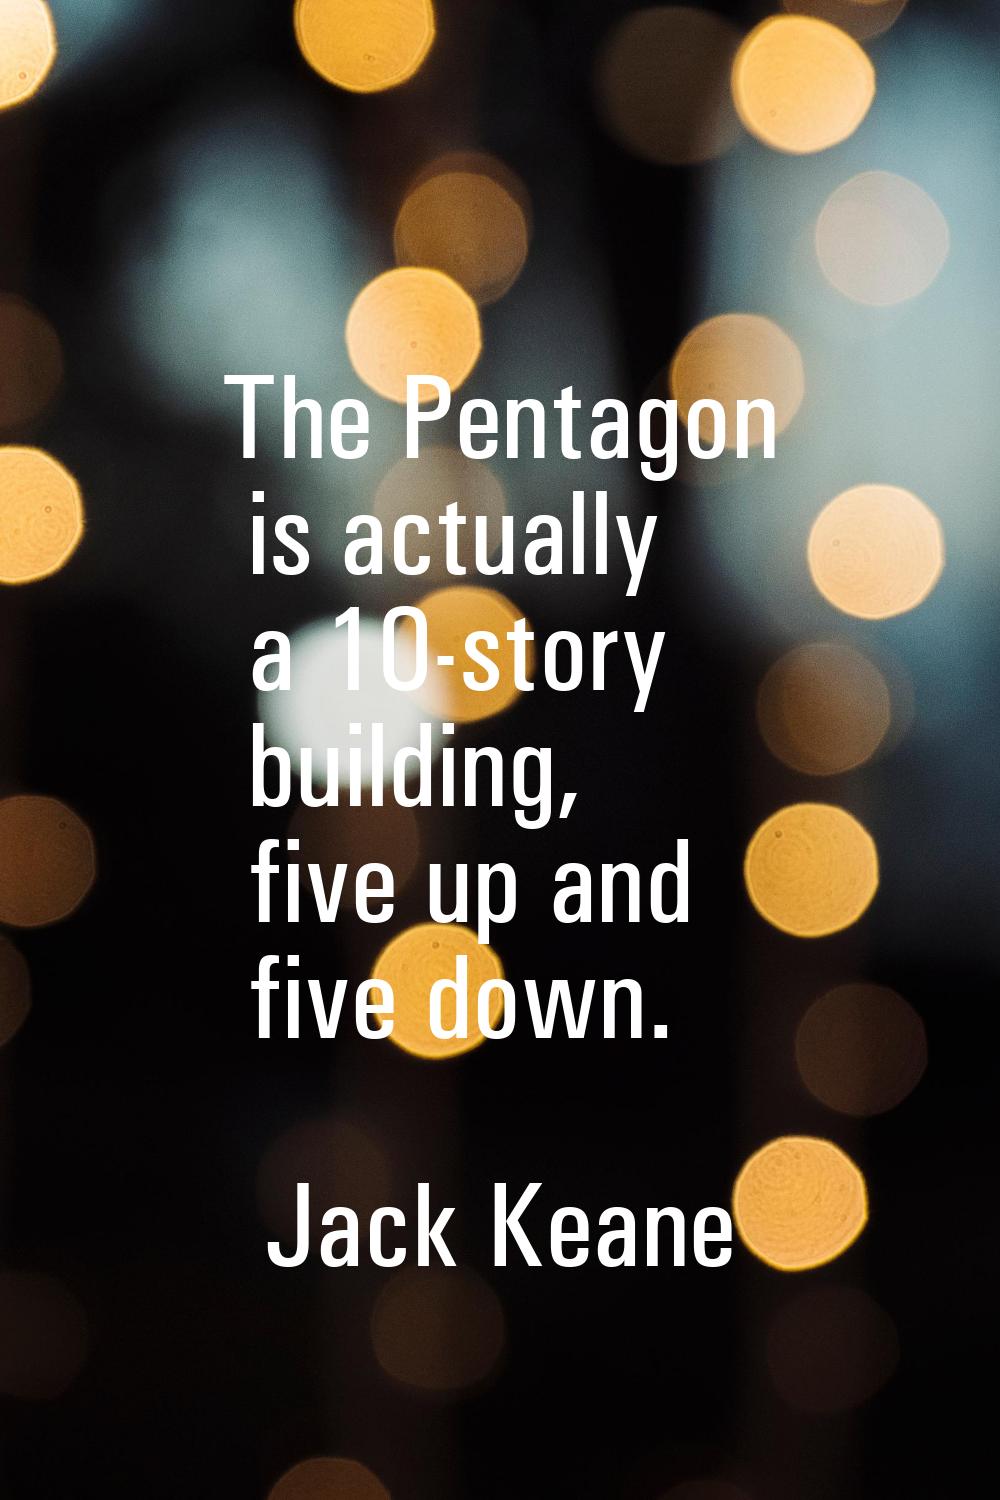 The Pentagon is actually a 10-story building, five up and five down.